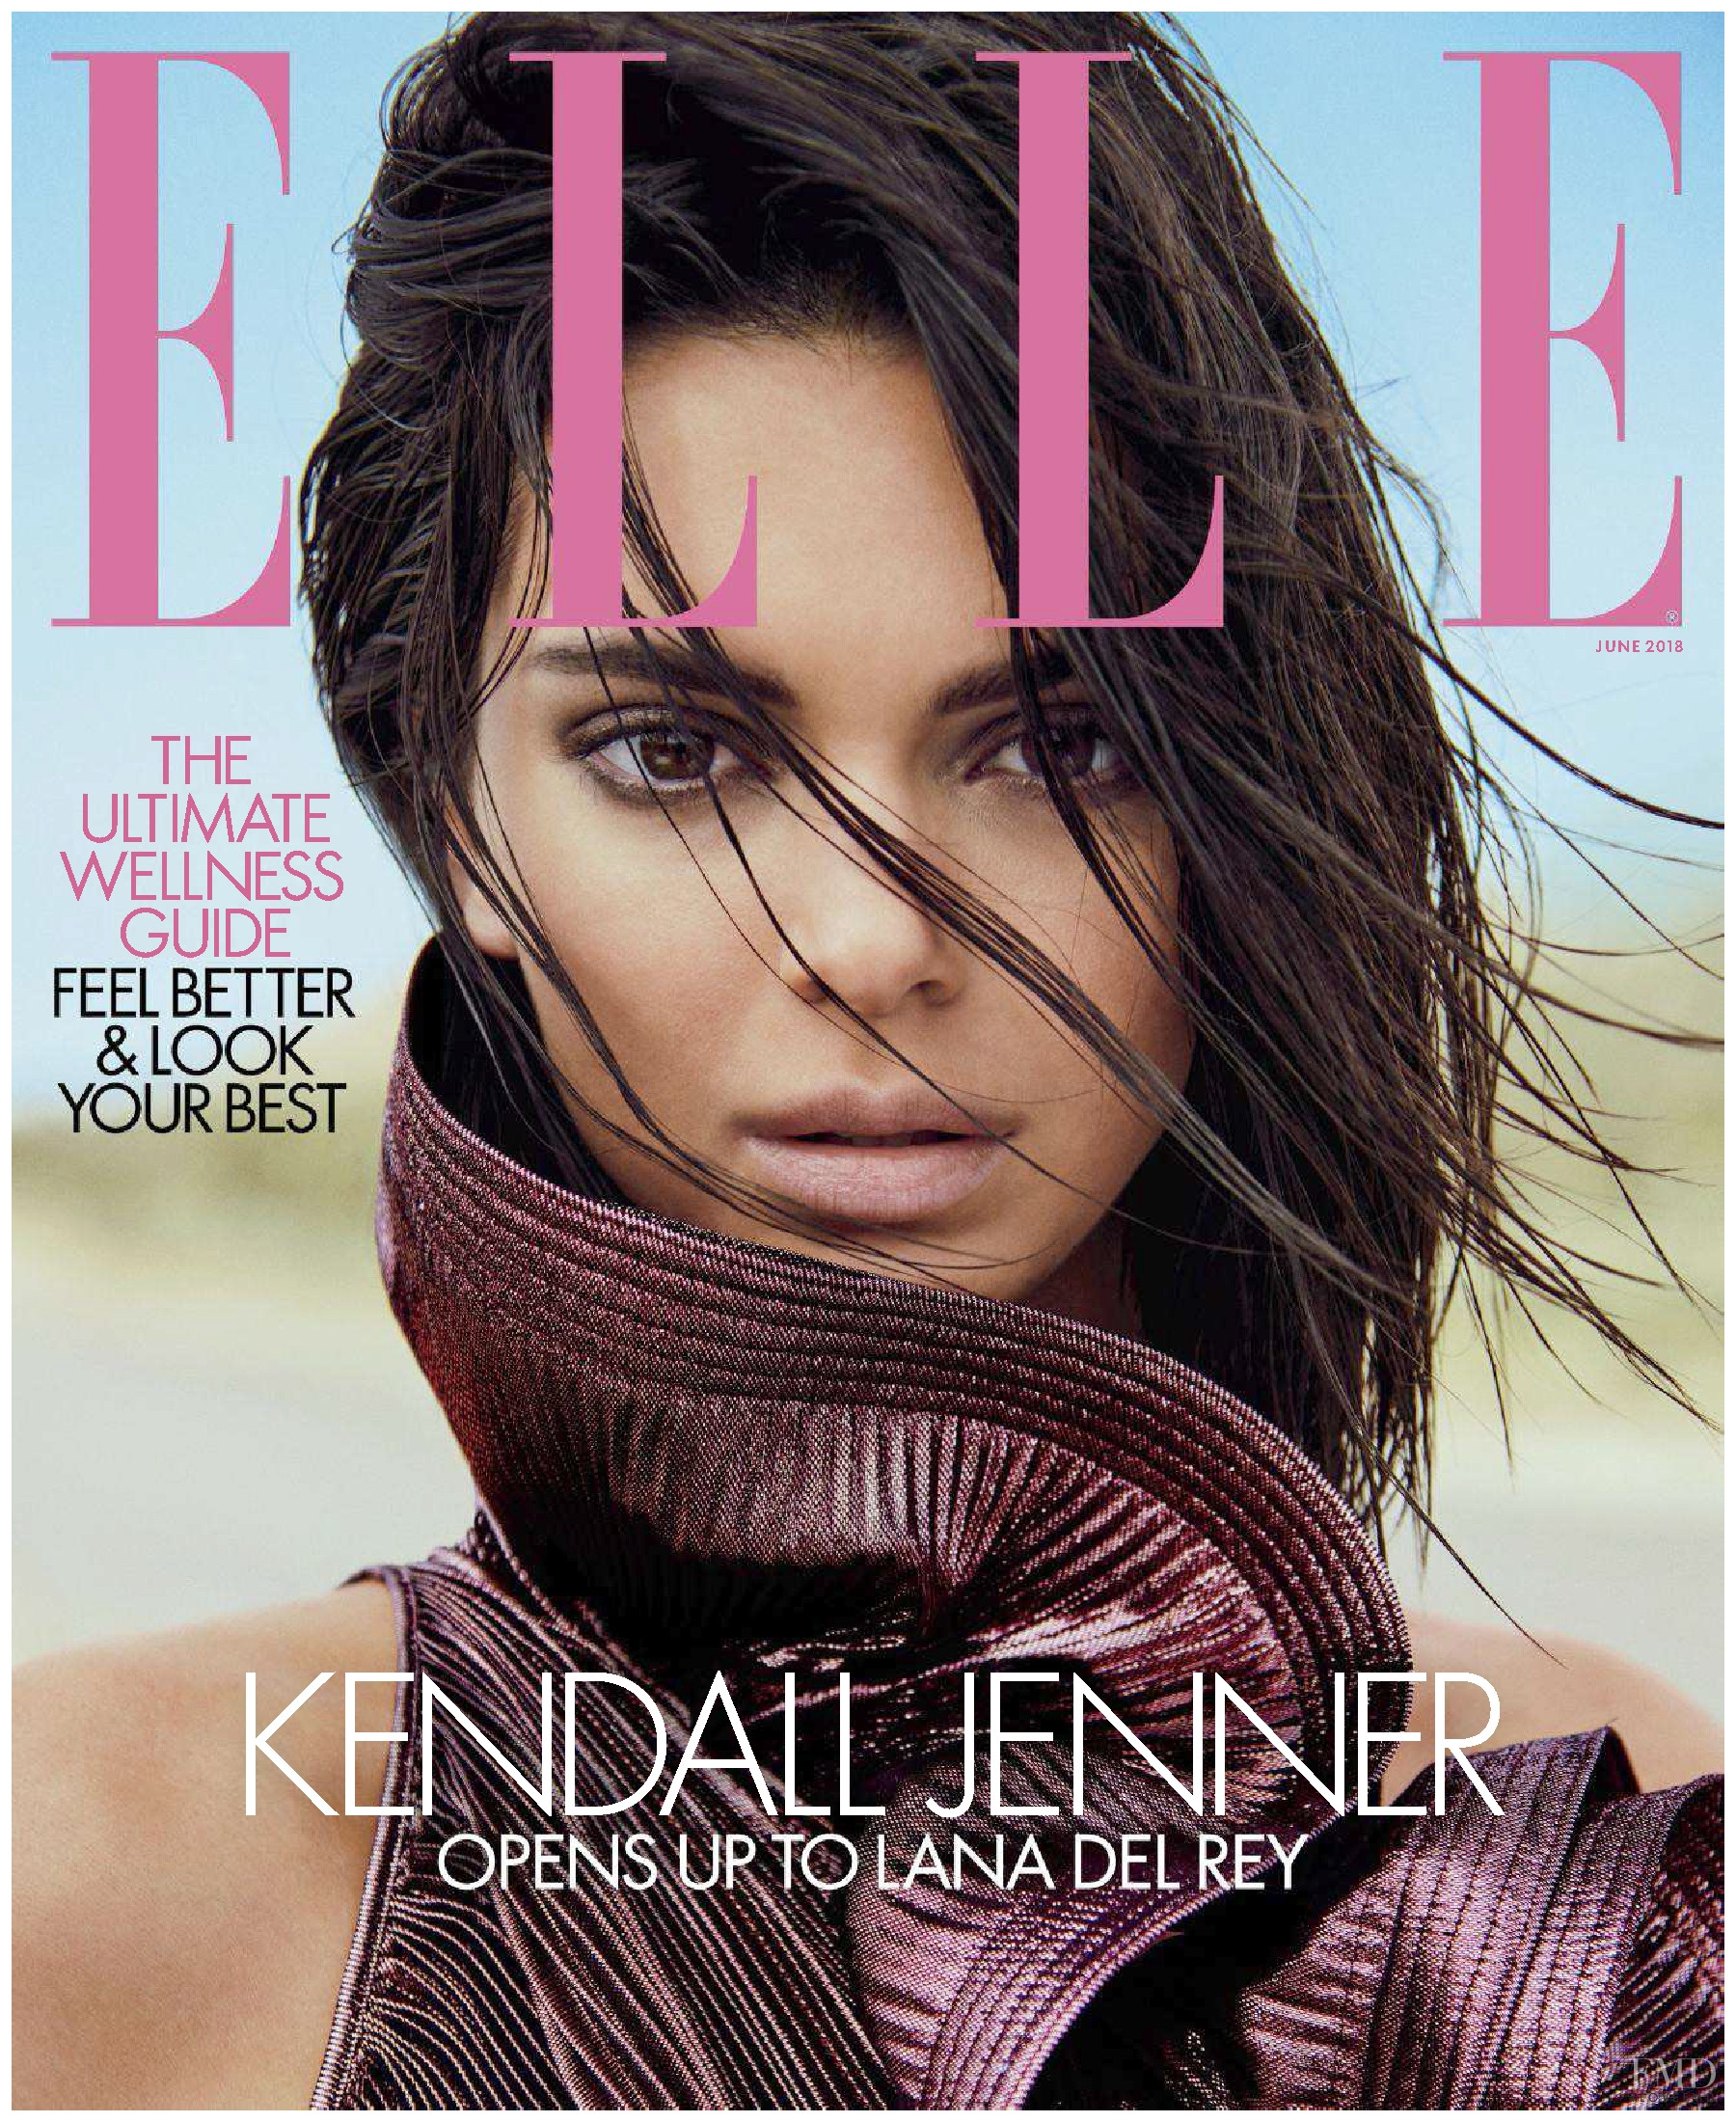 Cover of Elle USA with Kendall Jenner, June 2018 (ID:46837)| Magazines ...